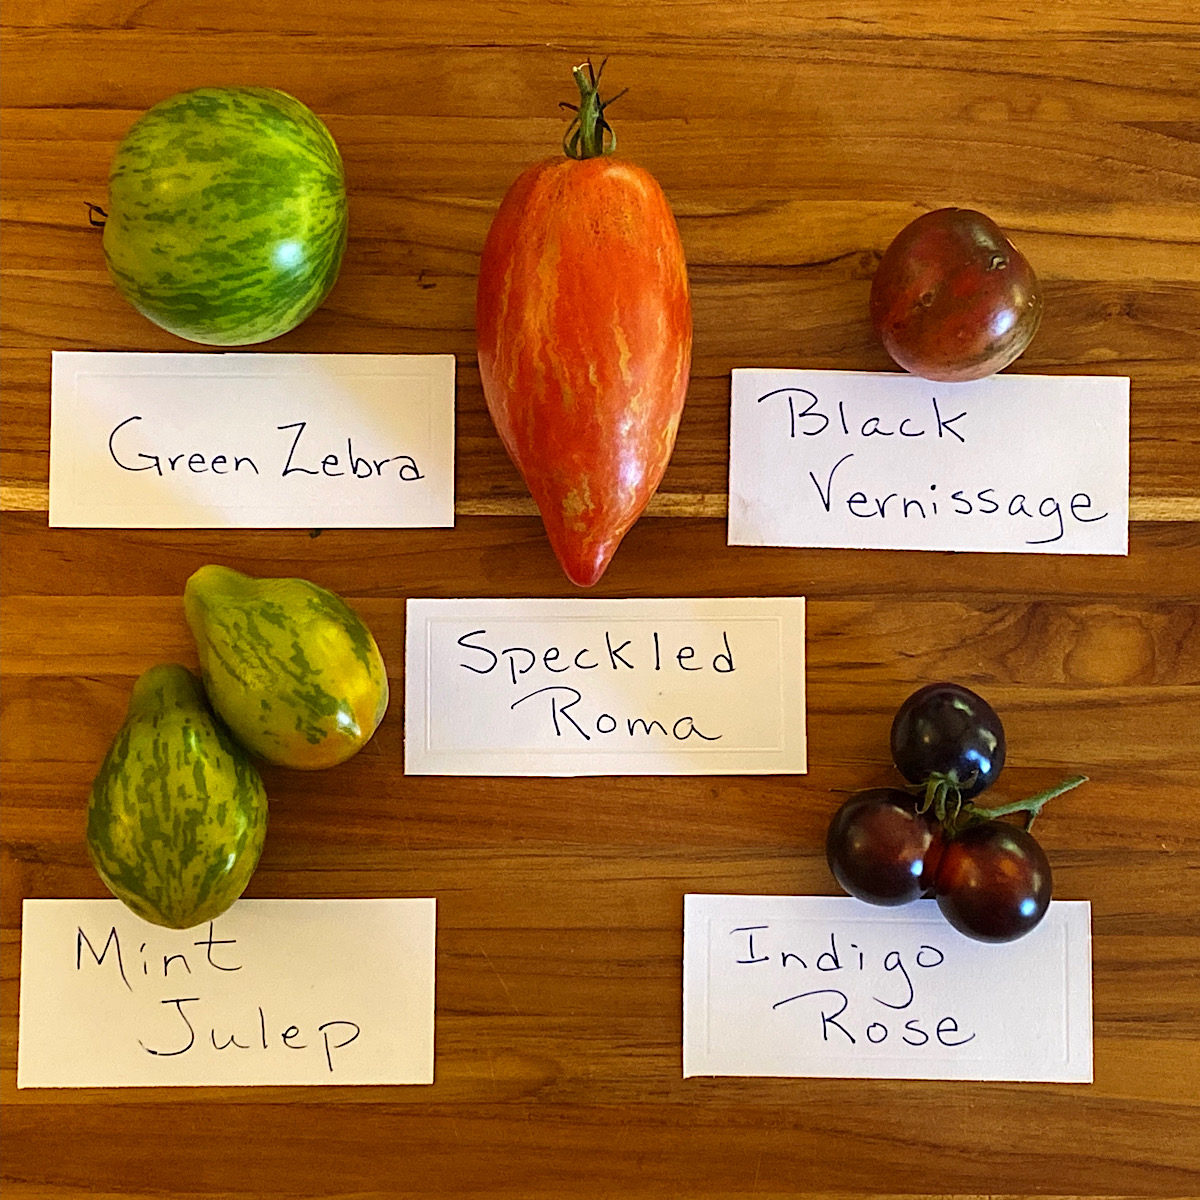 Five different bicolor heirloom tomatoes